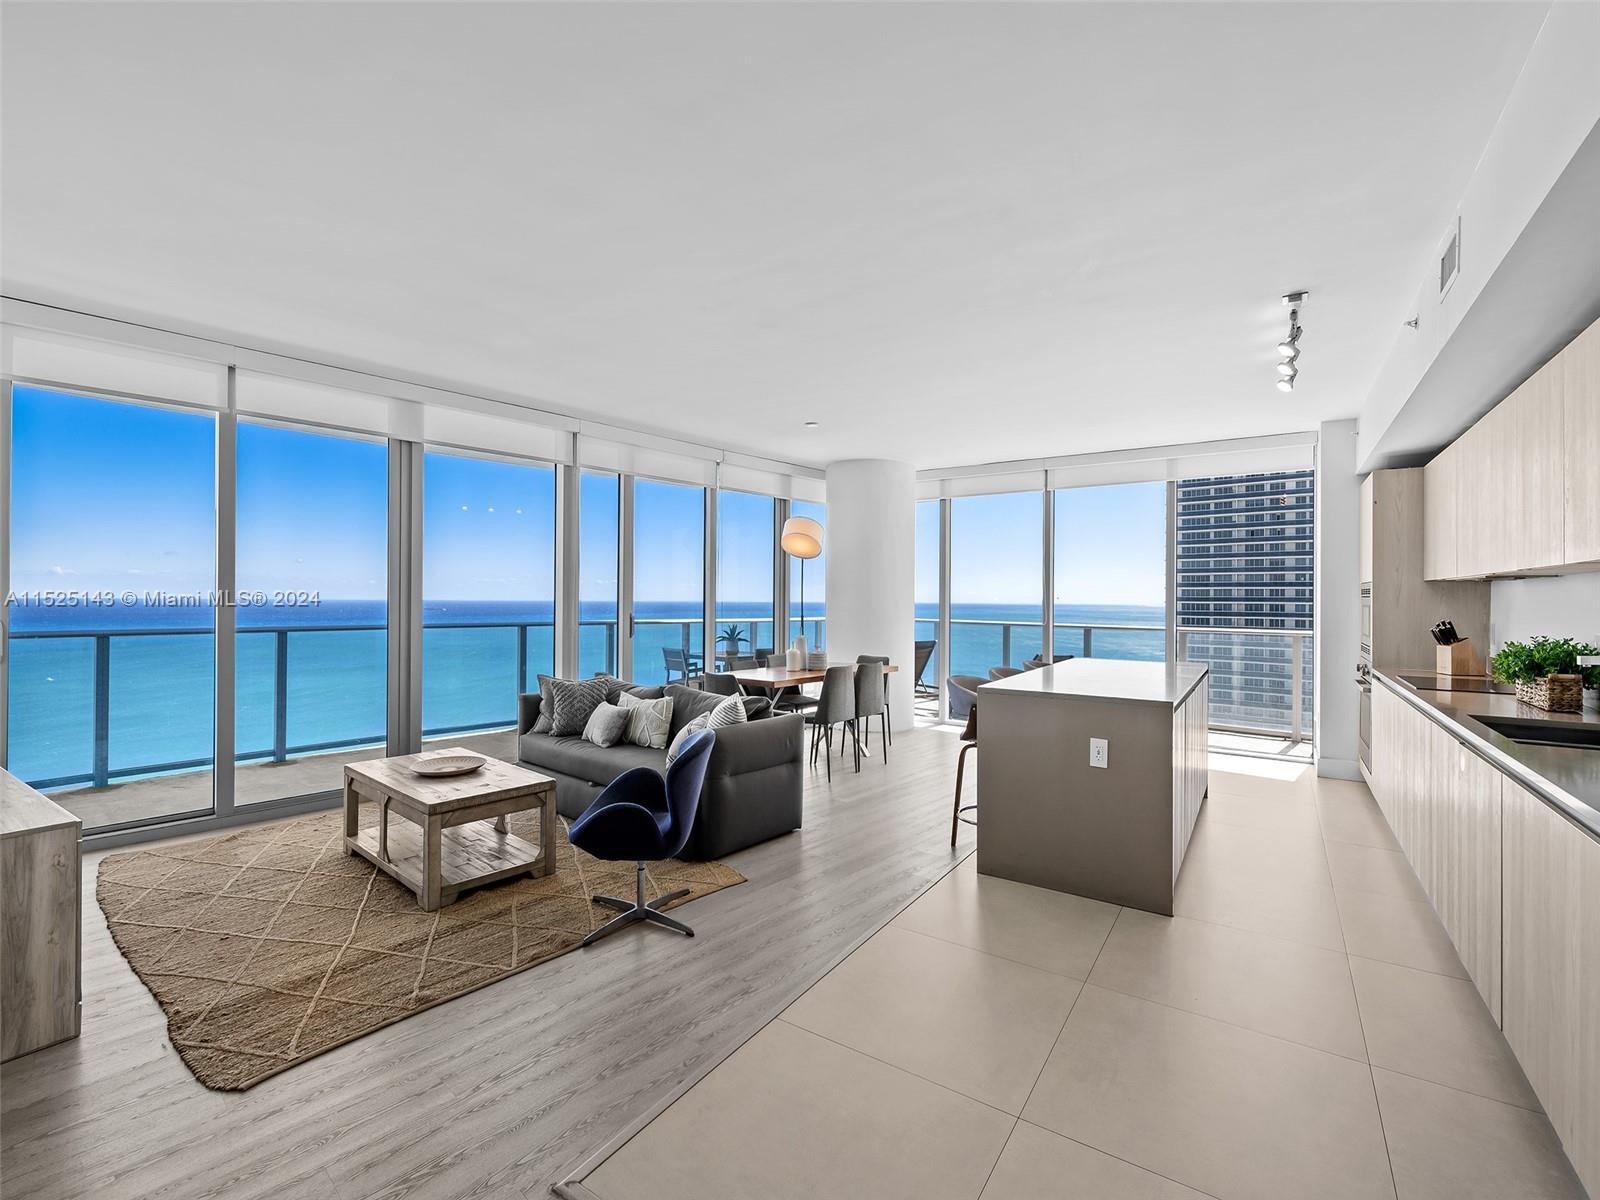 Photo of 4111 S Ocean Dr #3201 in Hollywood, FL